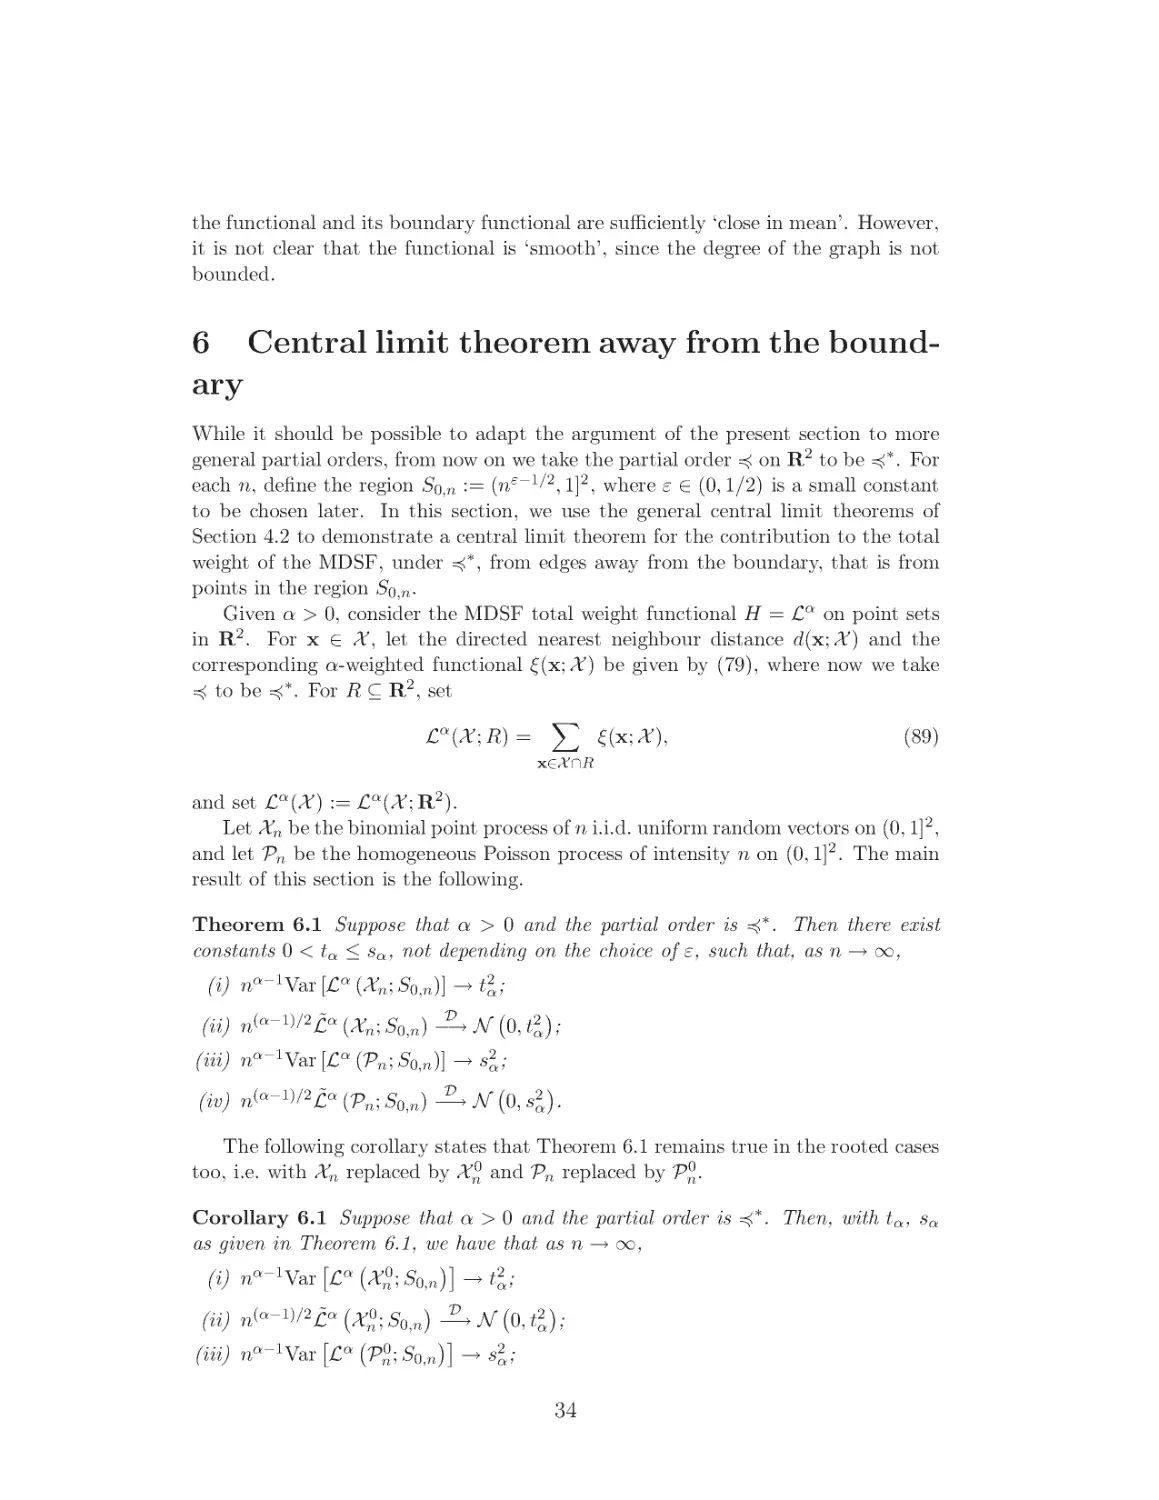 Central limit theorem away from the boundary